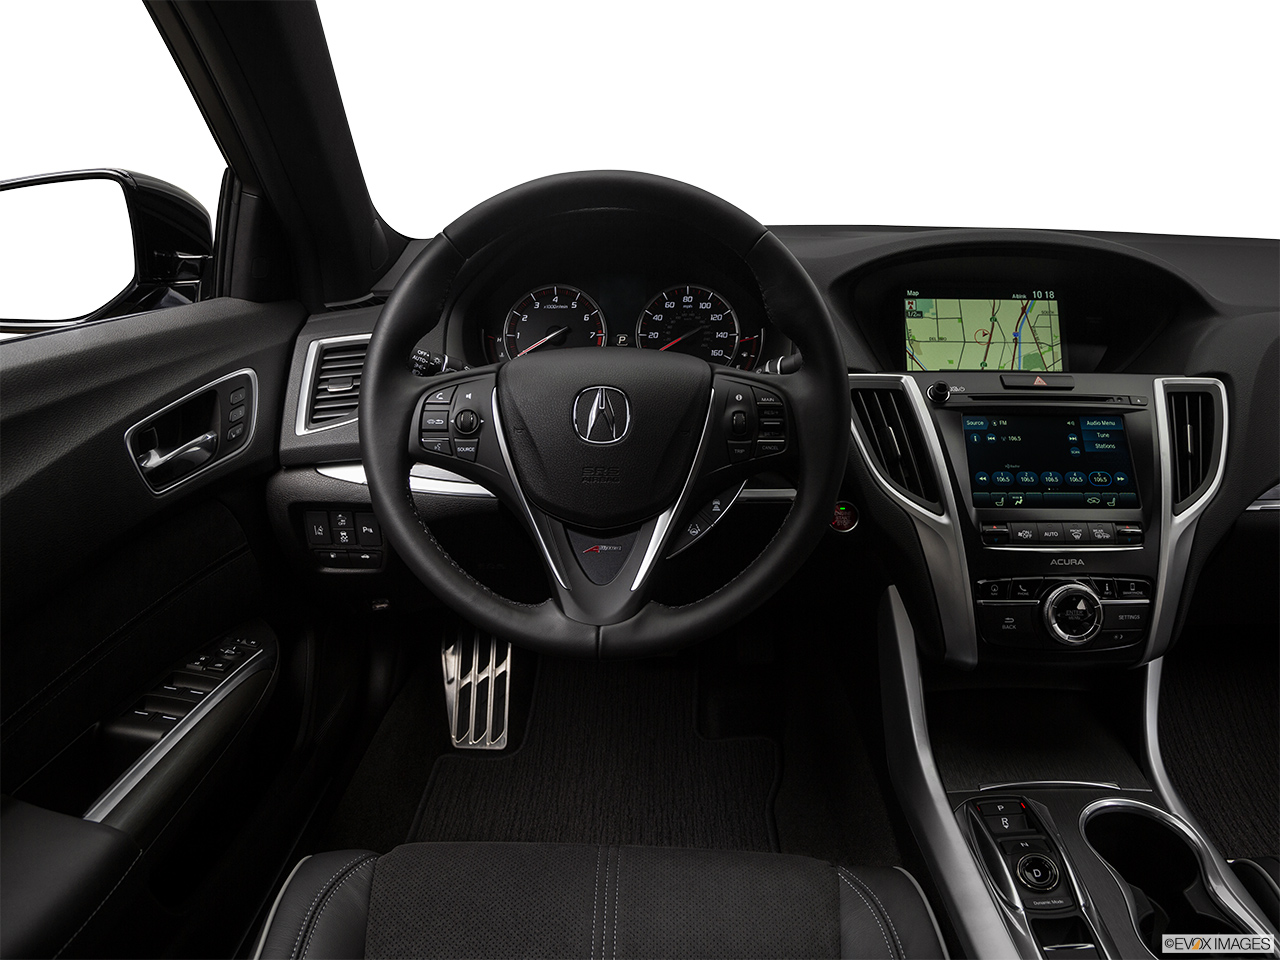 2019 Acura TLX 3.5L Steering wheel/Center Console. 